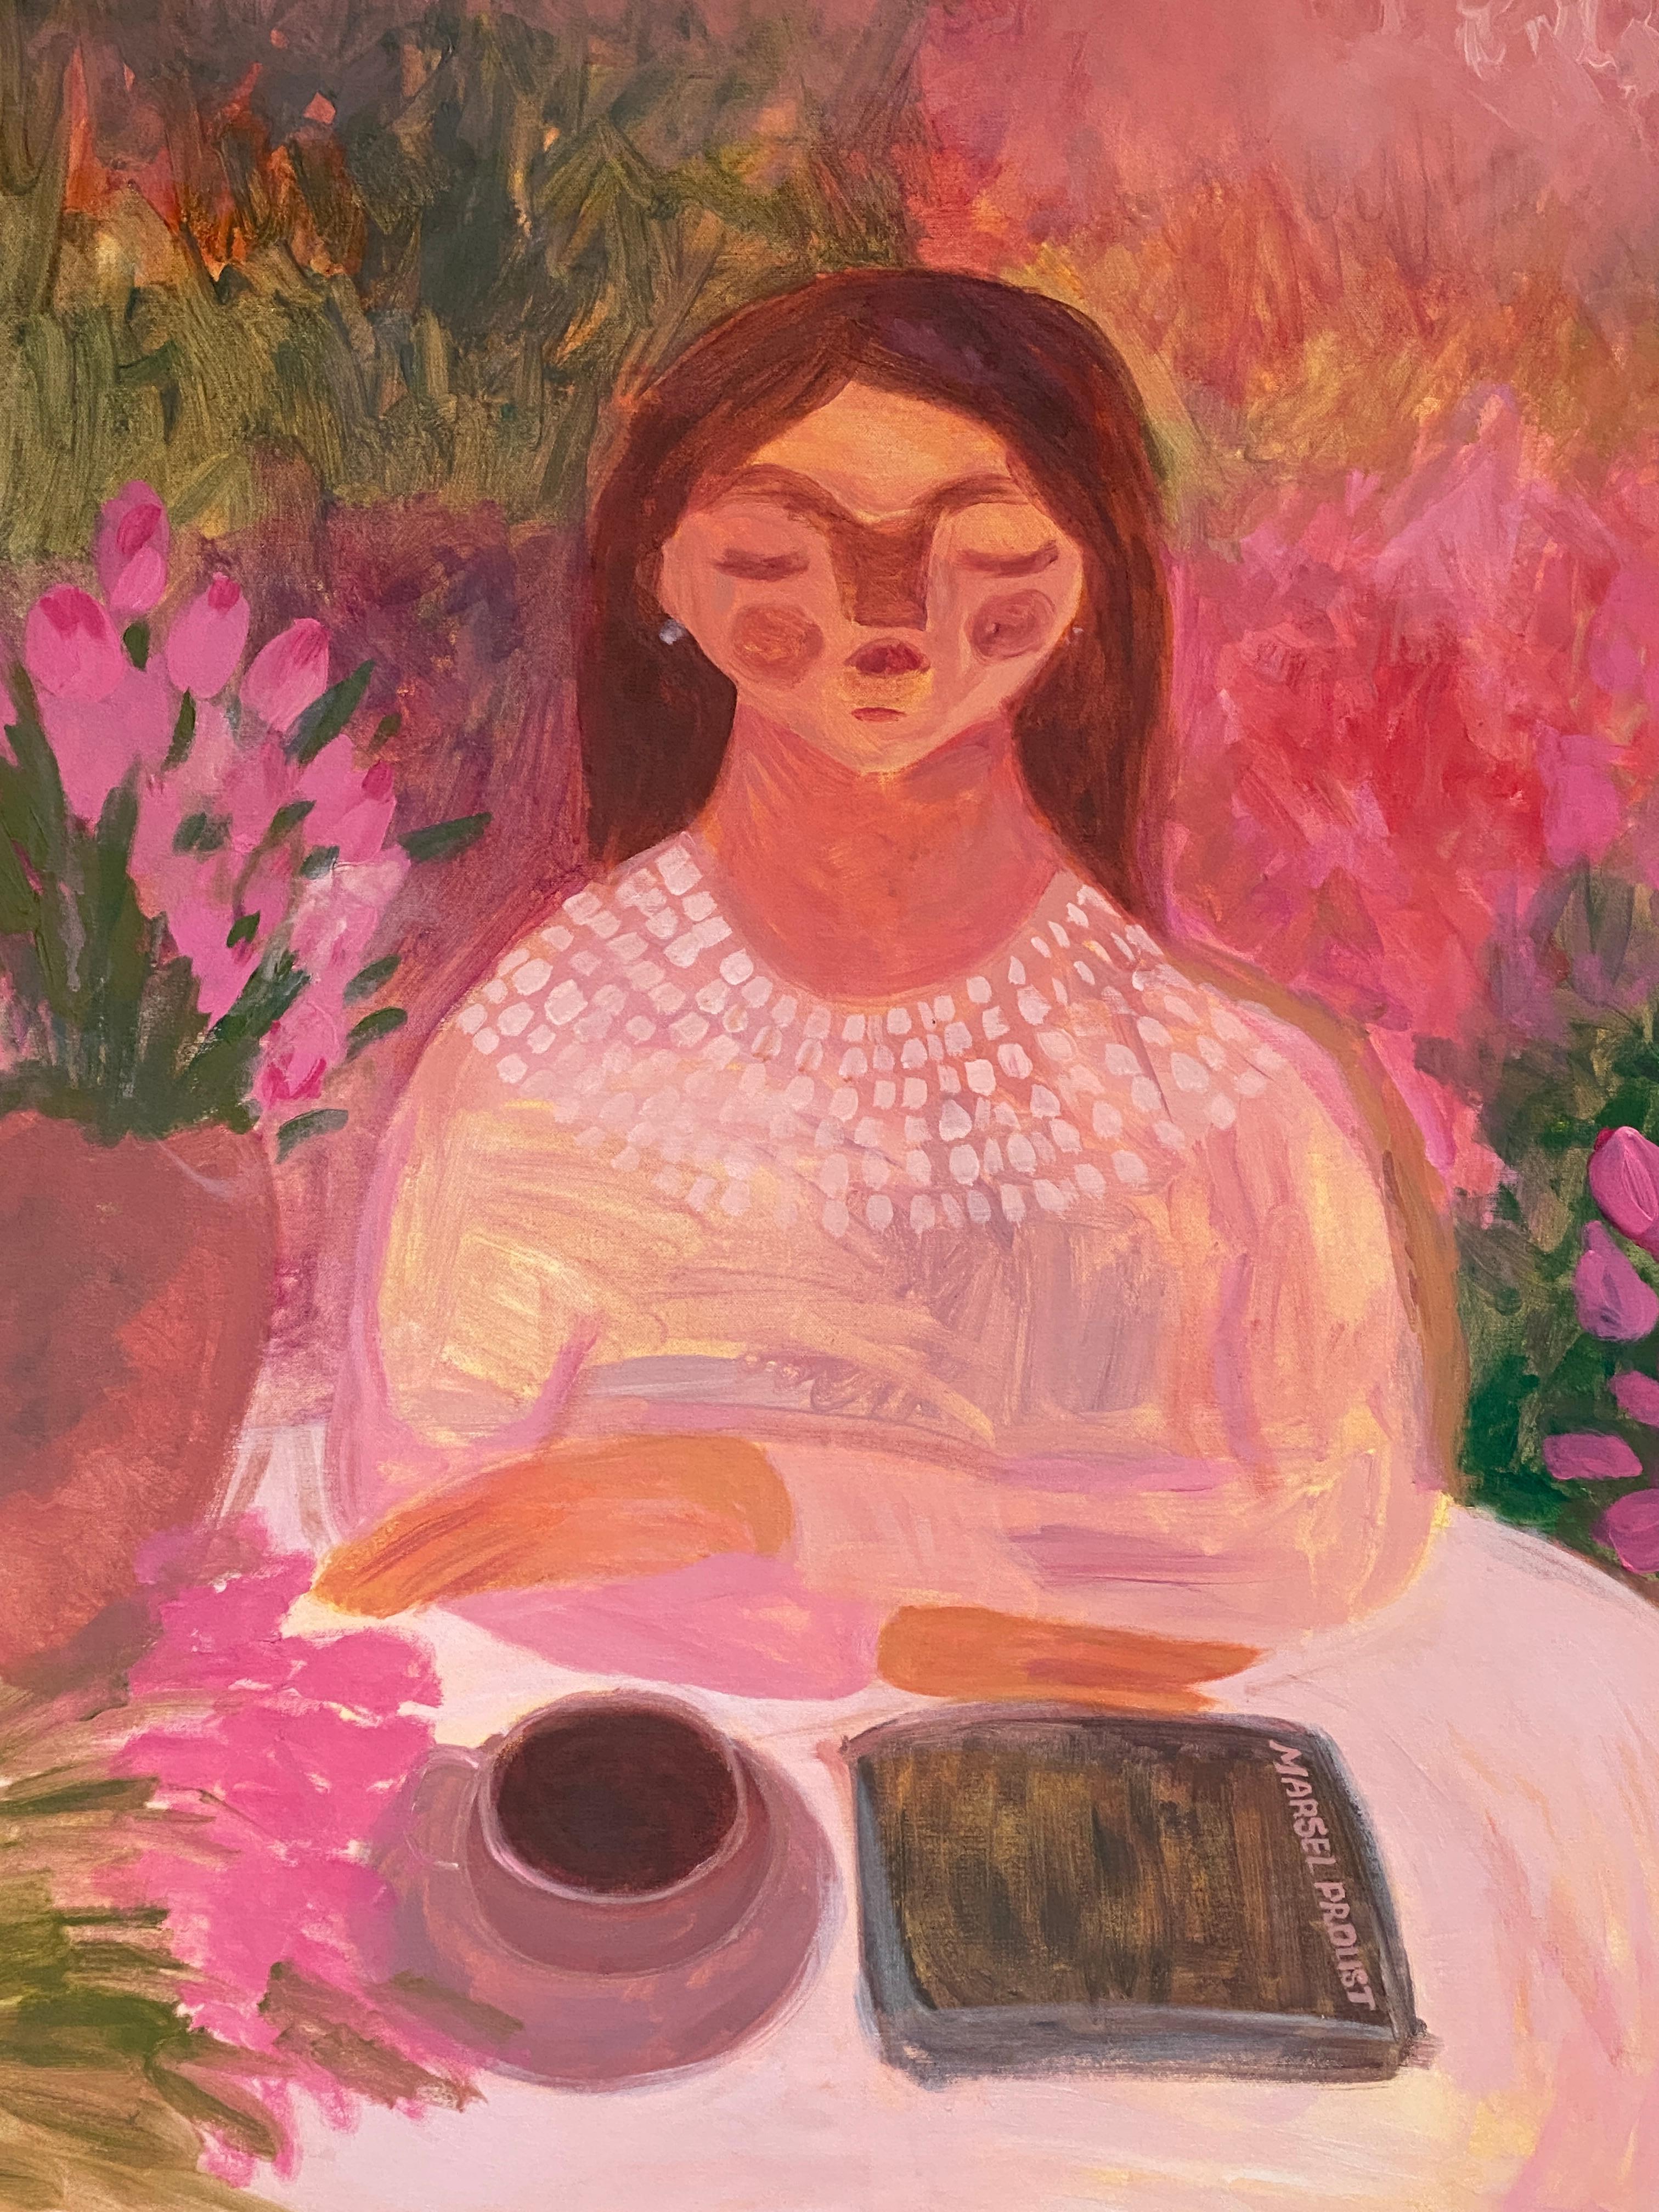 Reading in the garden - Painting by Dasha Pogodina